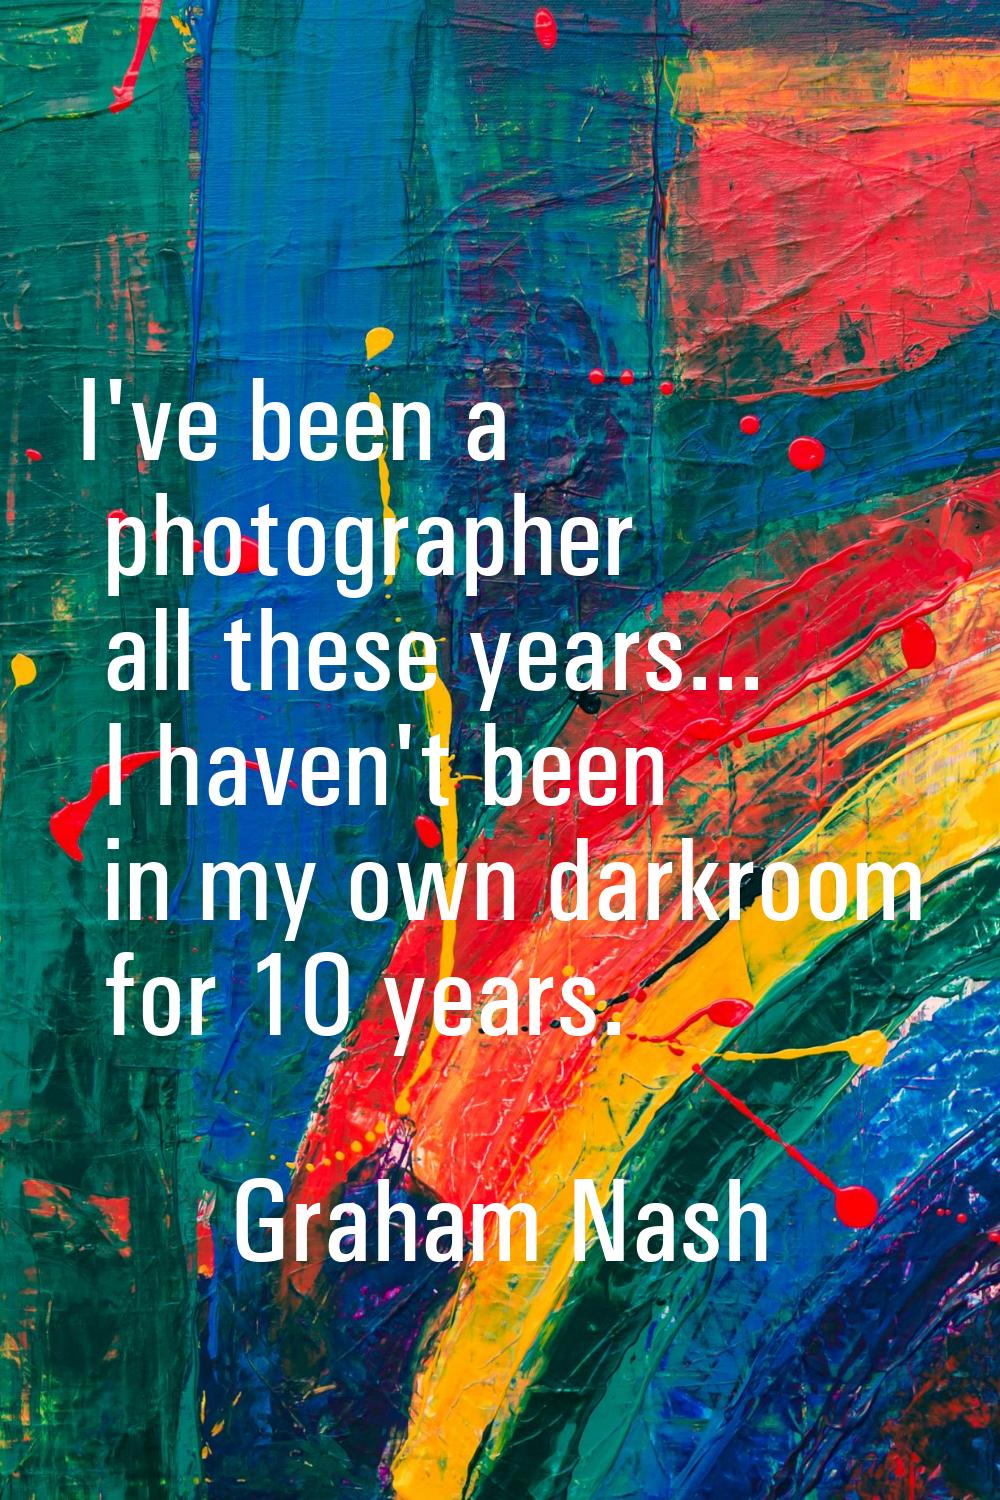 I've been a photographer all these years... I haven't been in my own darkroom for 10 years.